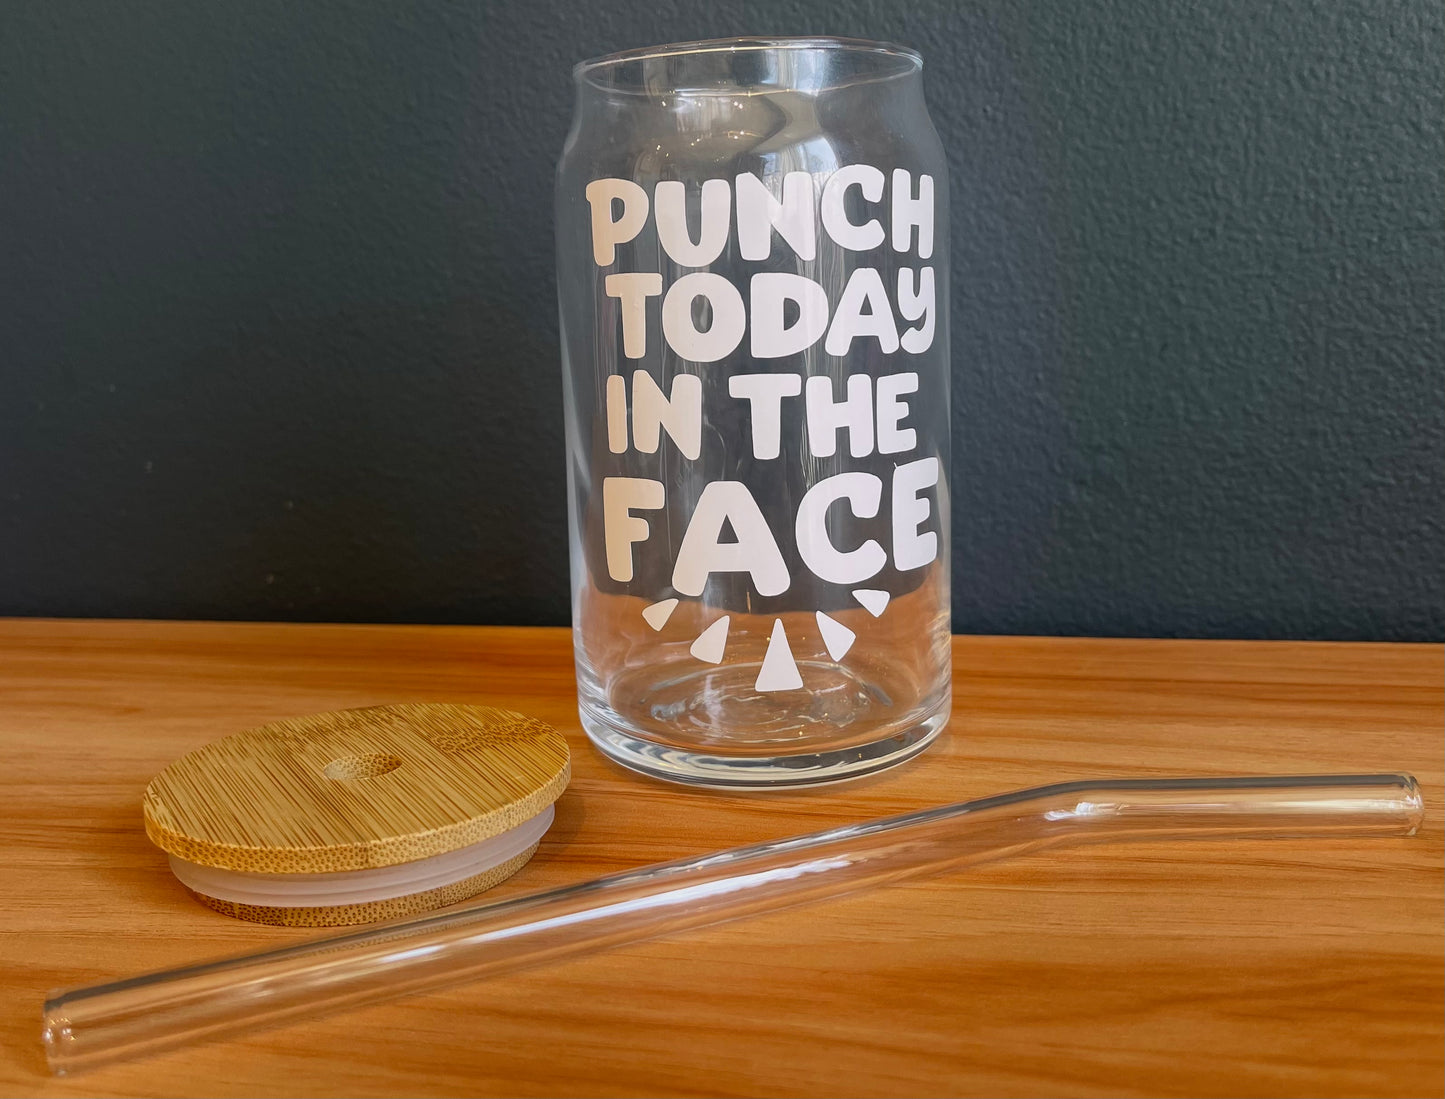 Punch today in the Face Glass